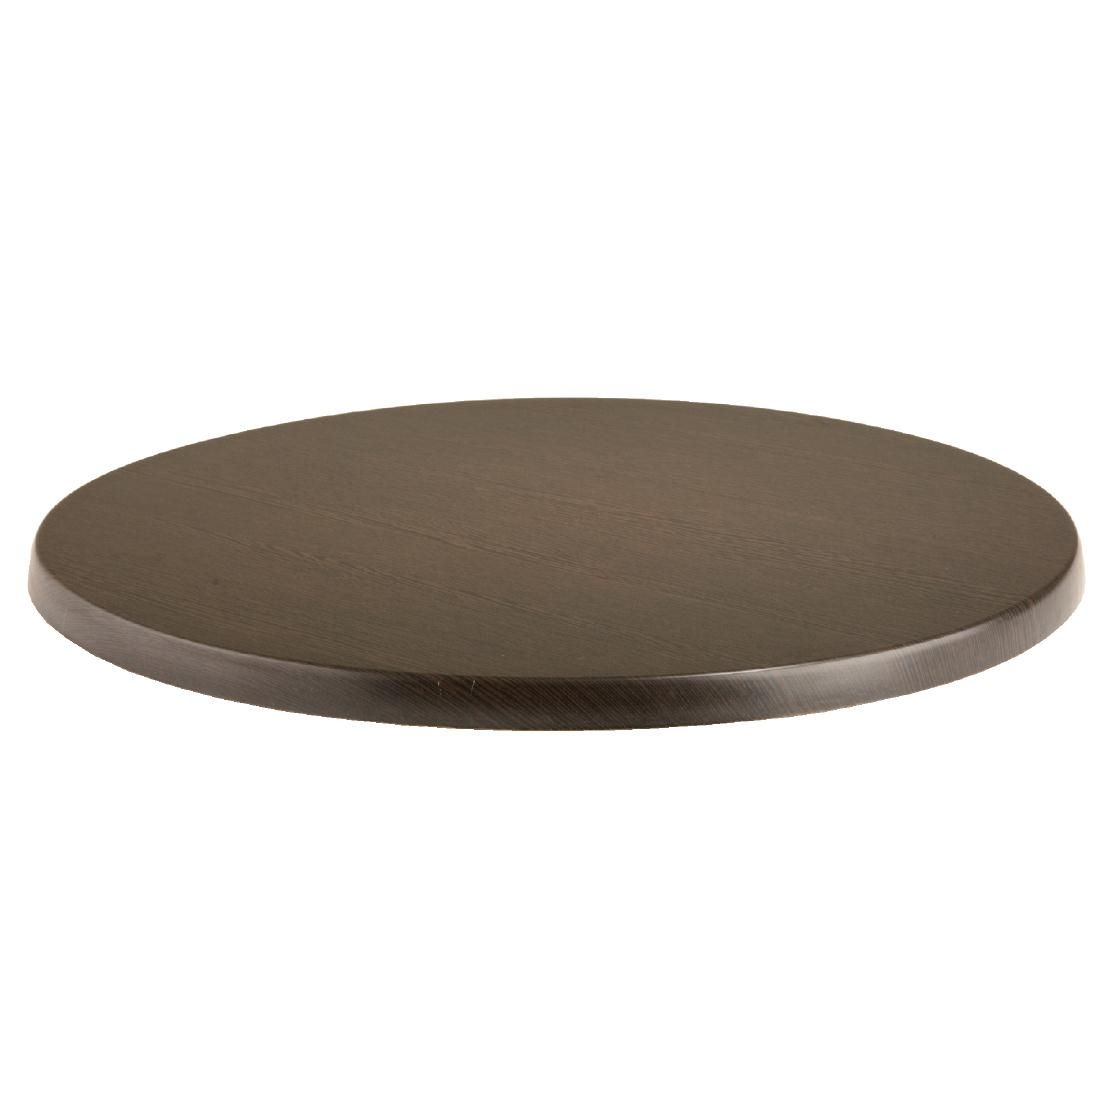 Werzalit Pre-drilled Round Table Top  Wenge 700mm